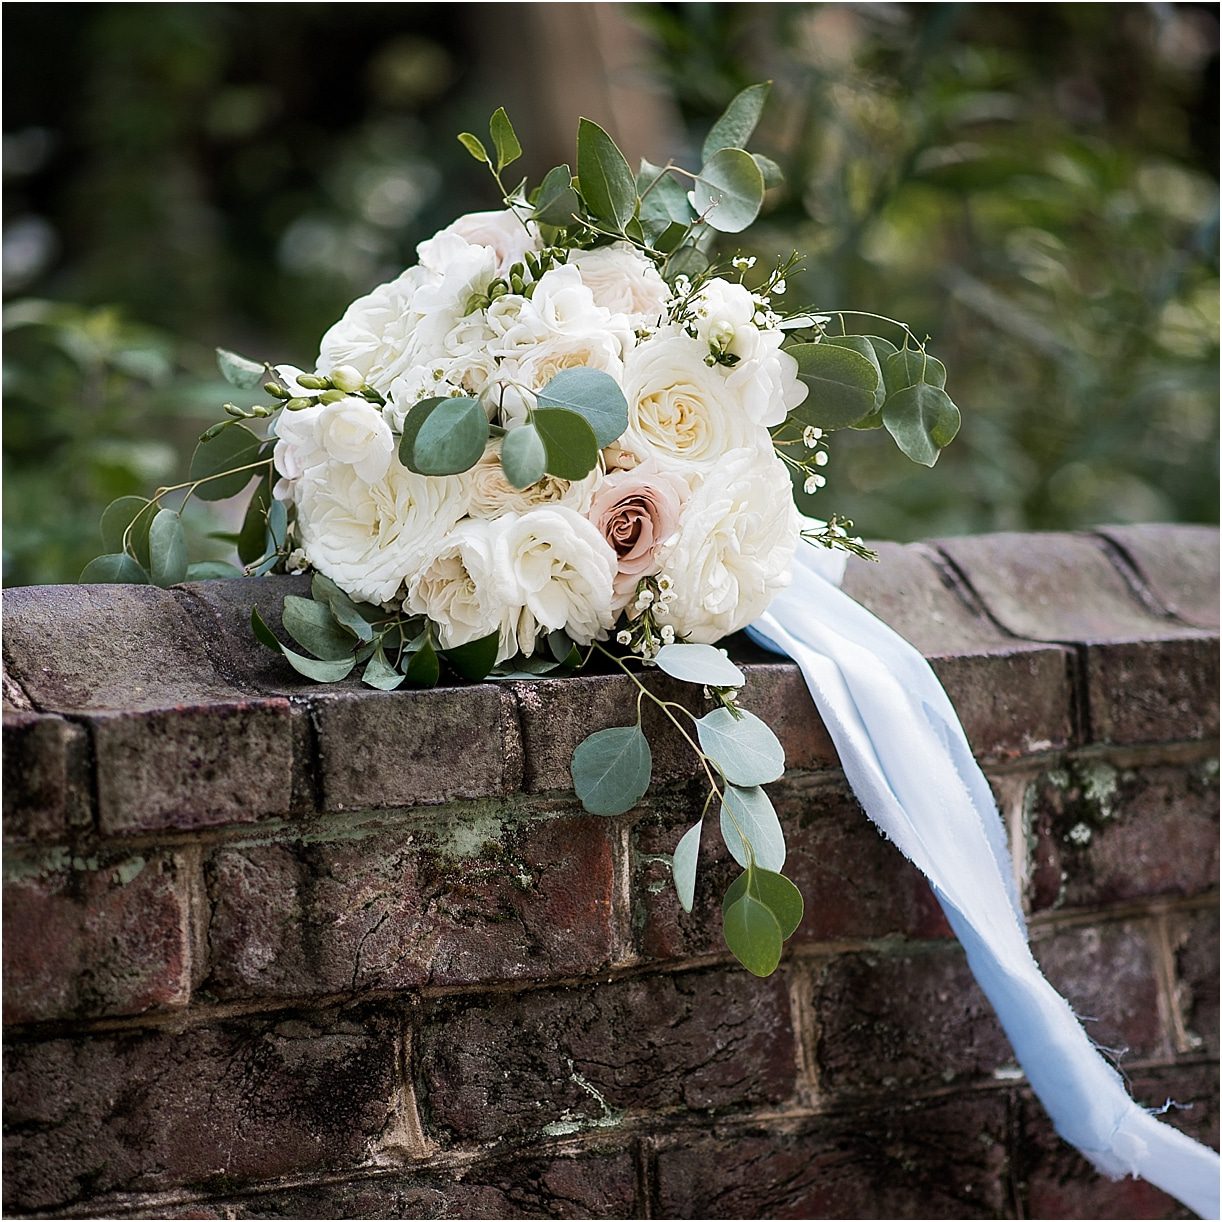 Blue Outdoor Wedding in Alexandria Virginia with Perfect Details | Hill City Bride Blog for Ideas and Inspiration Bouquet